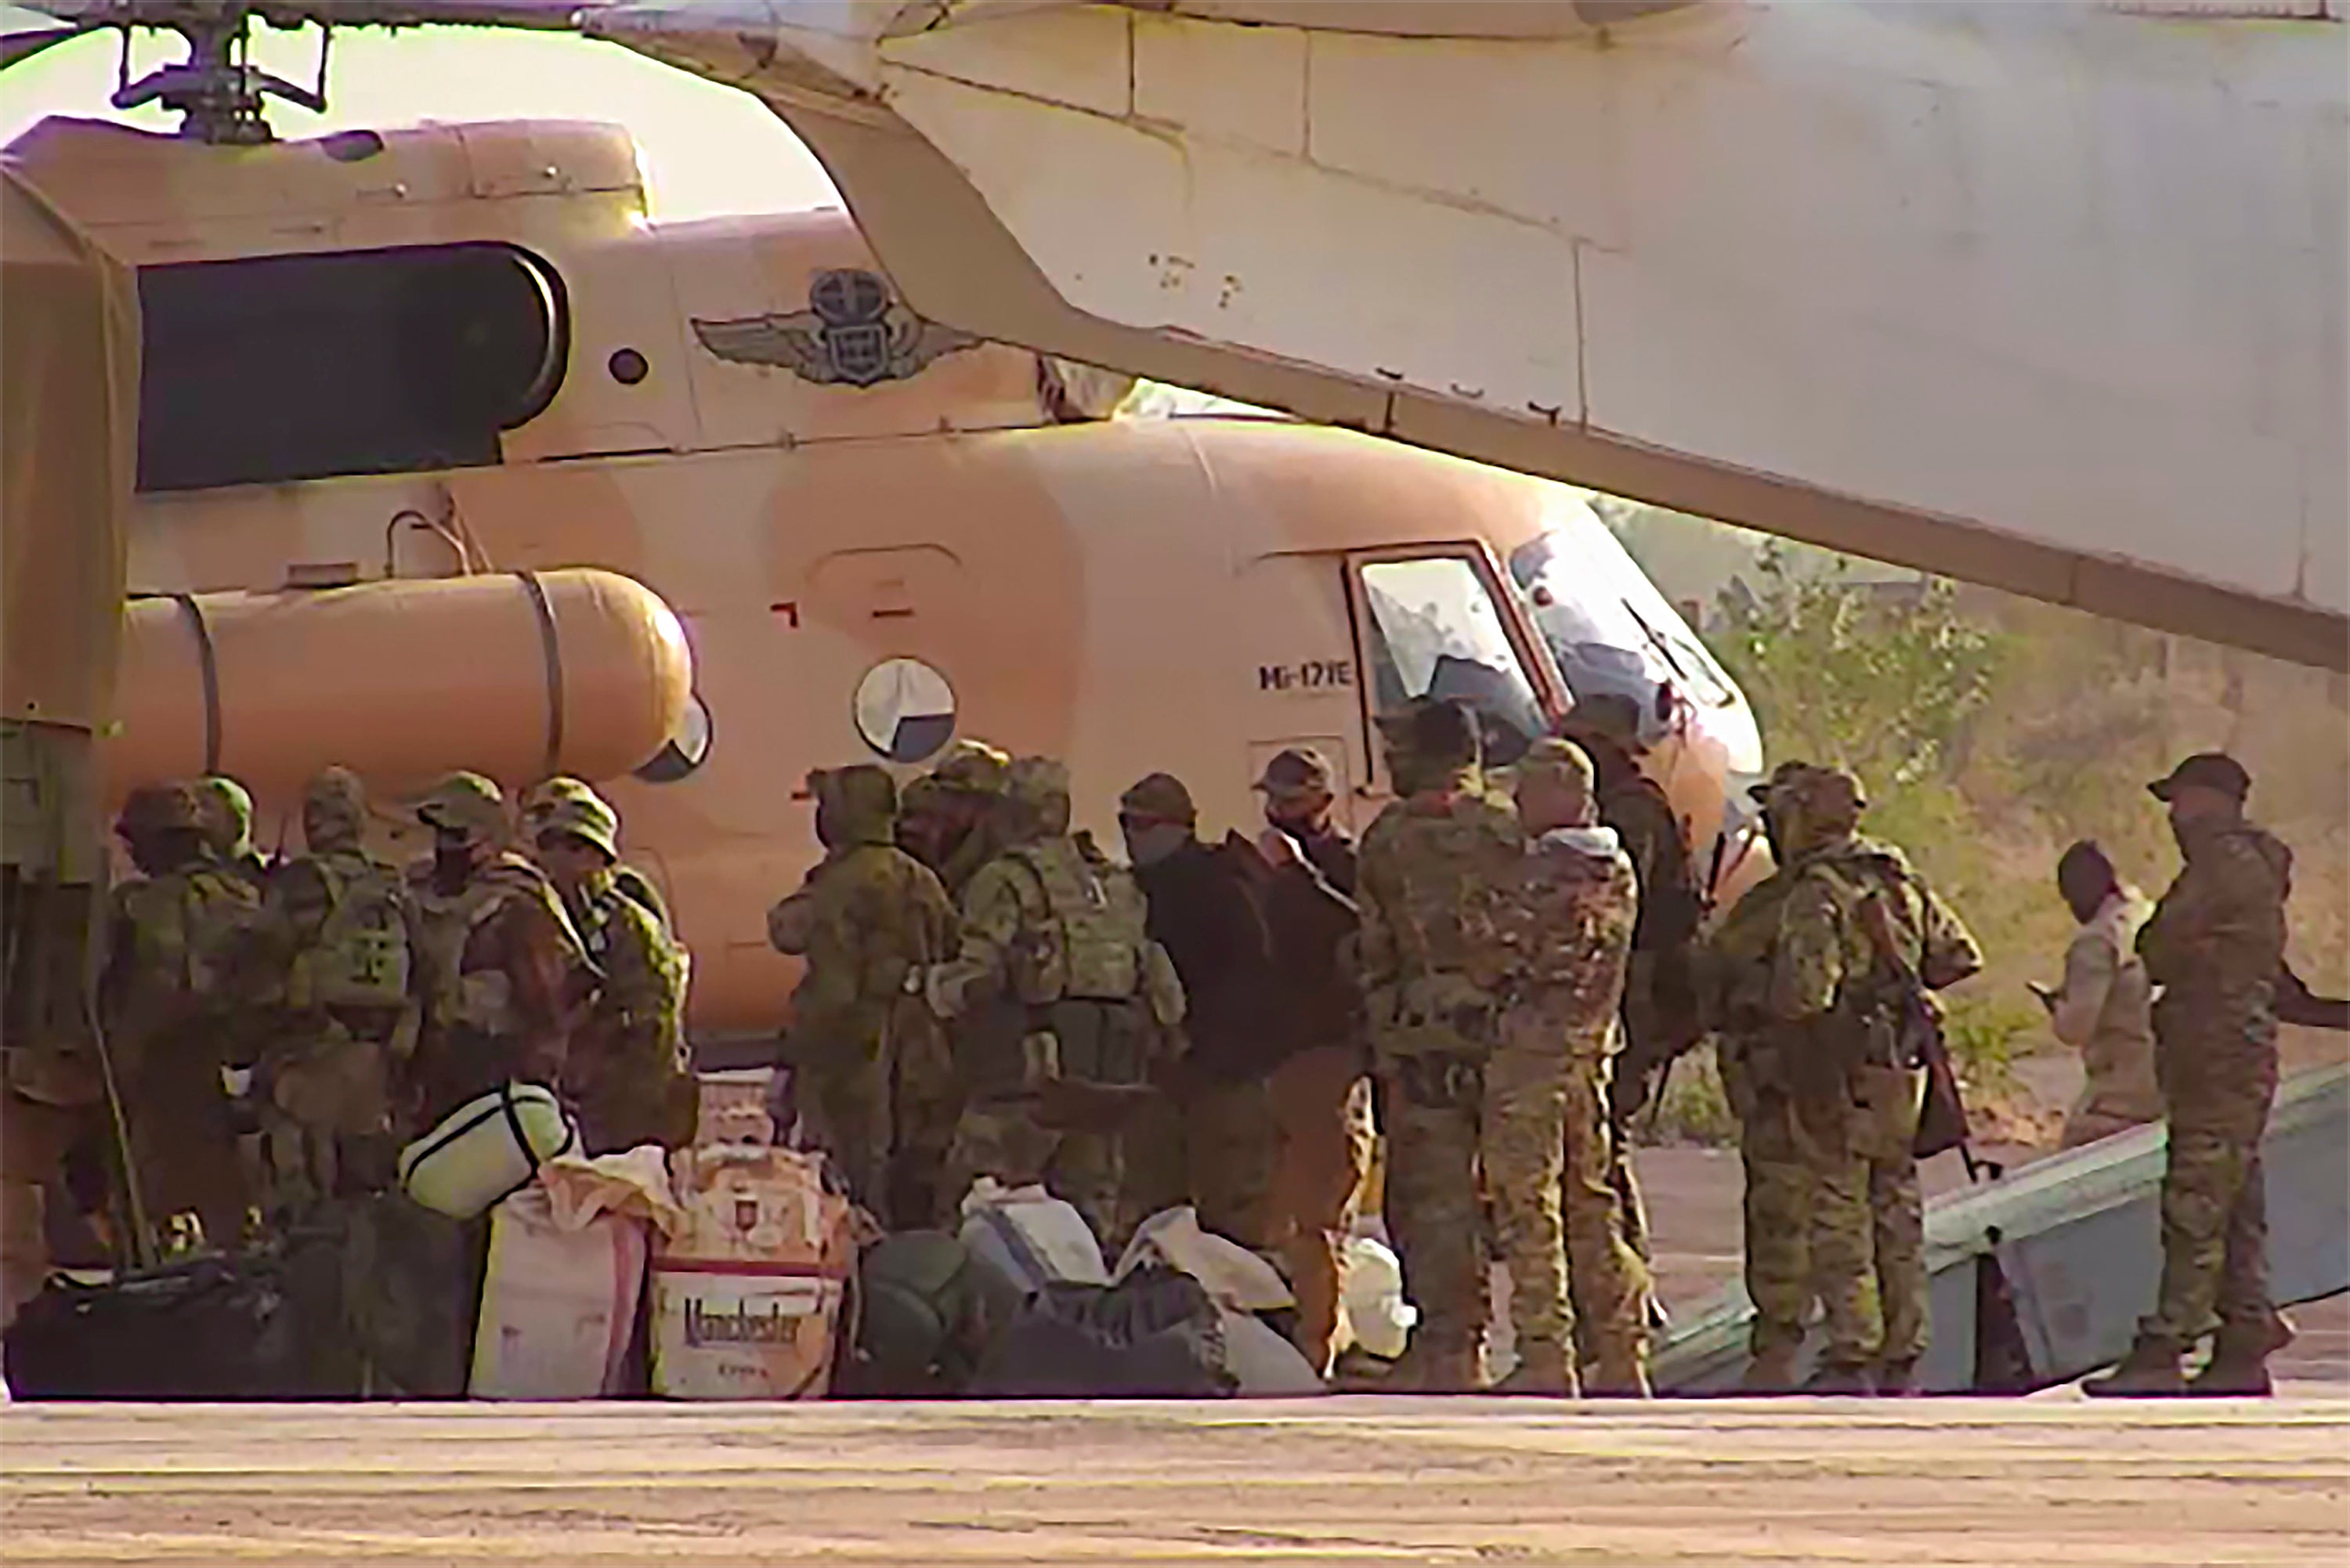 An undated photograph handed out by French forces in April showing Russian mercenaries boarding a helicopter in northern Mali